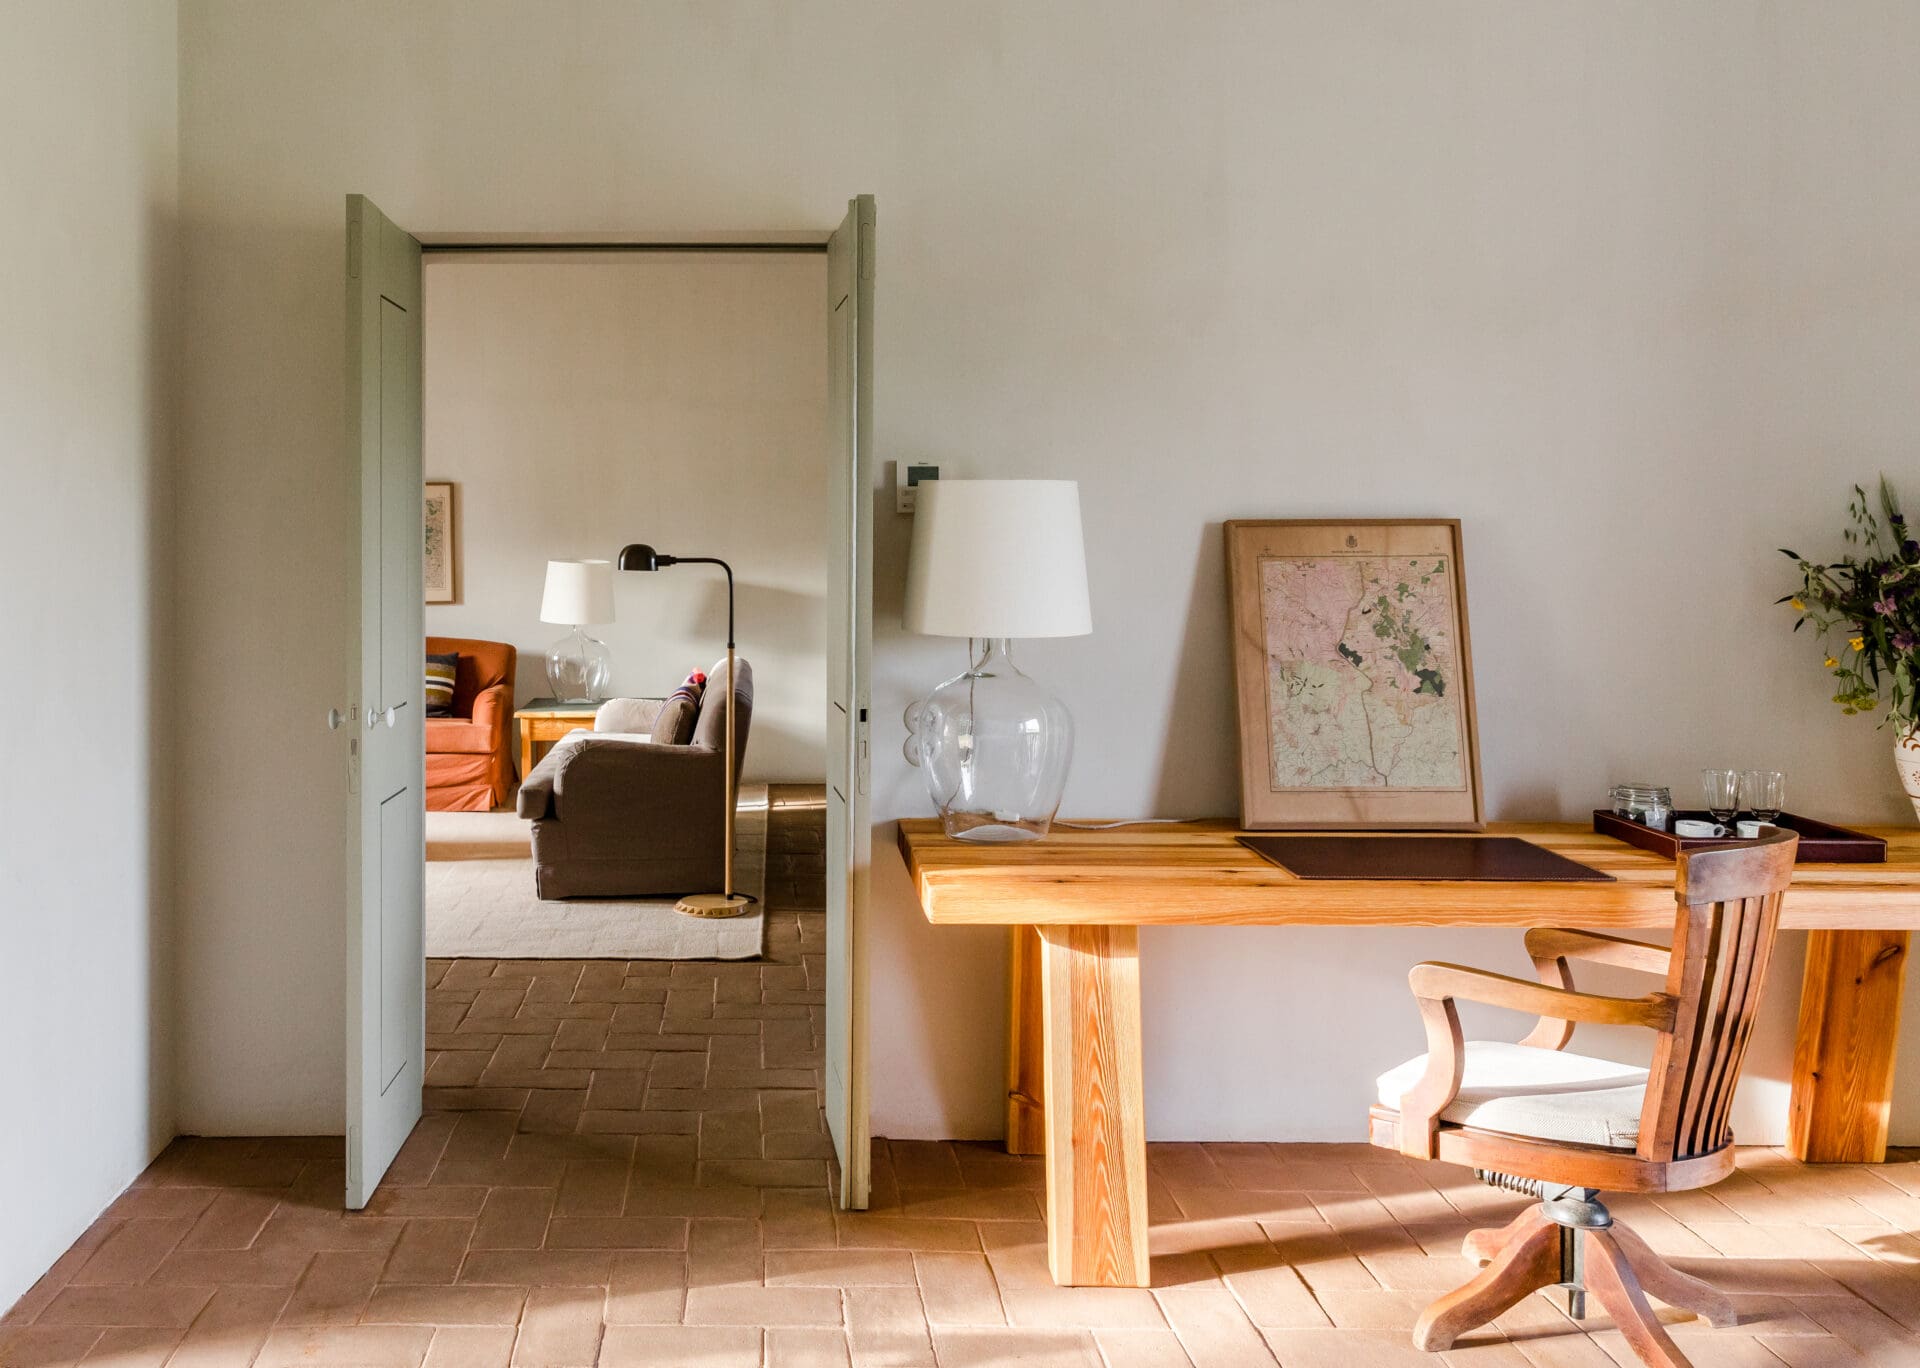 São Lourenço do Barrocal | Inside a suite, a wooden desk and chair sit against a whitewashed wall, with a view into a living room with brown and rust-orange furnishing